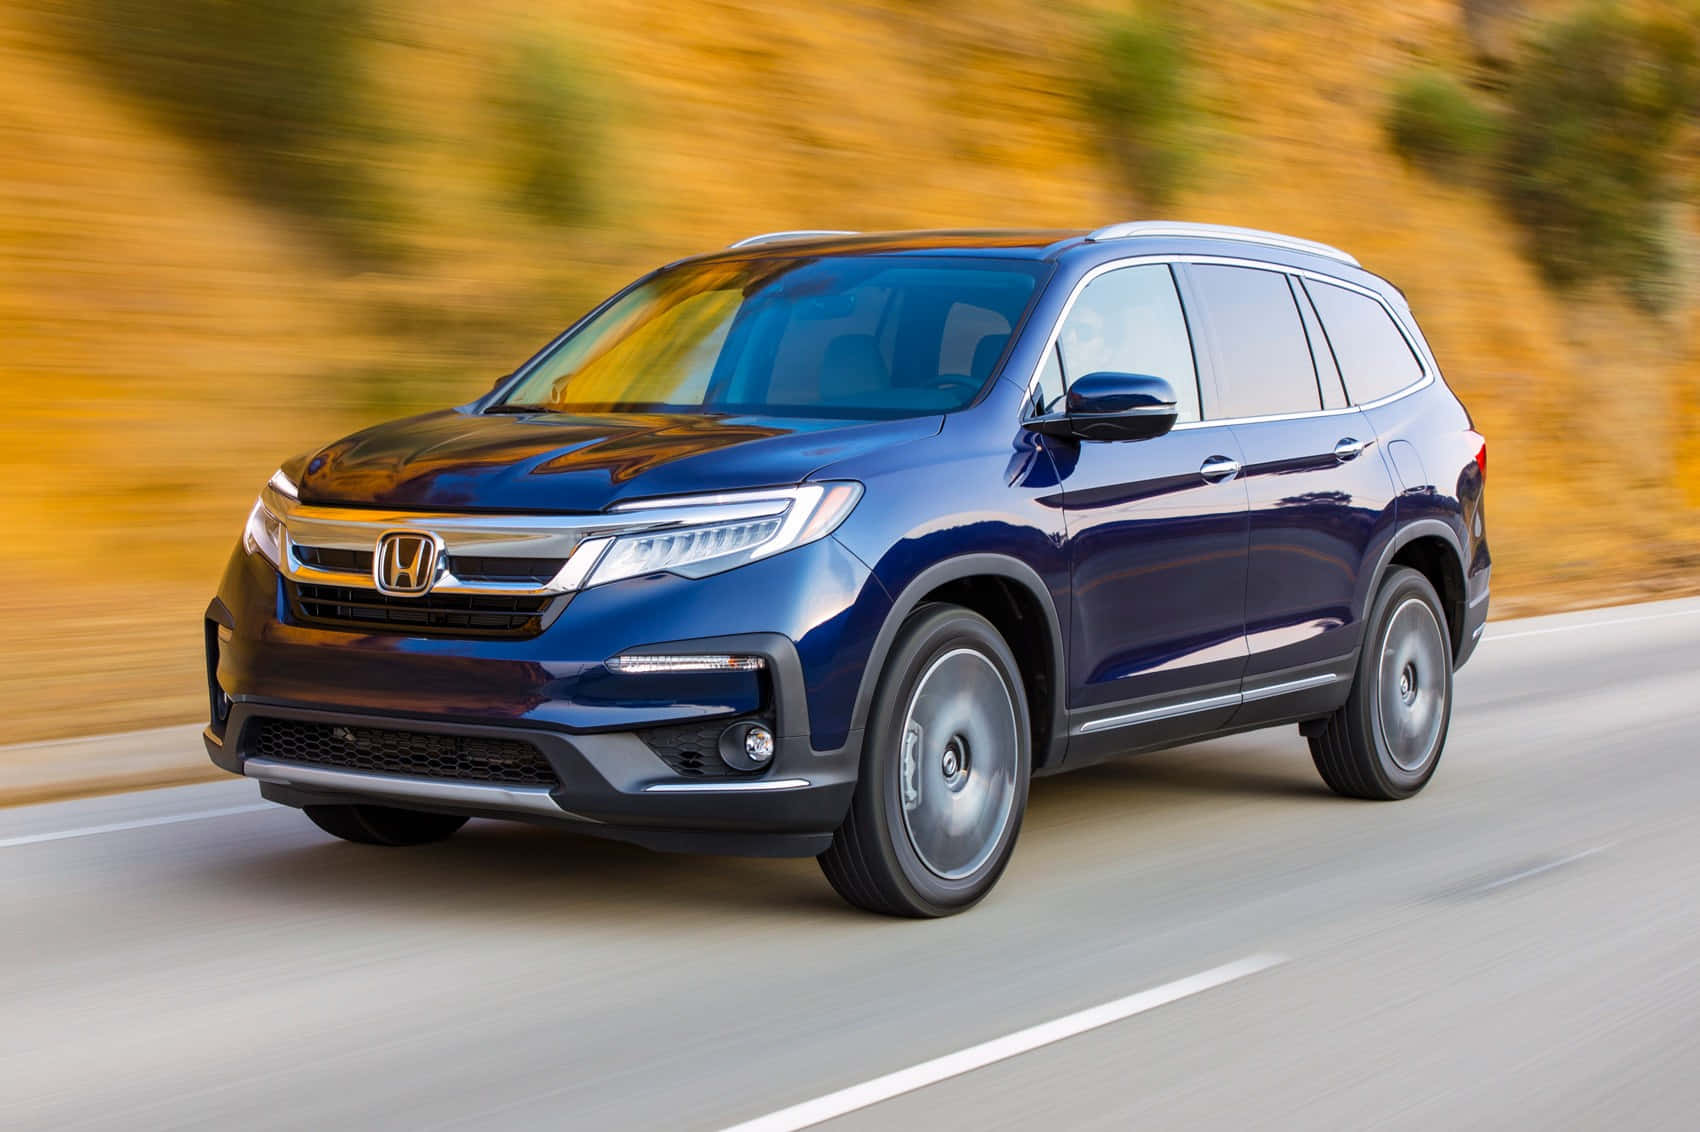 Cruise the City in Style with Honda Pilot